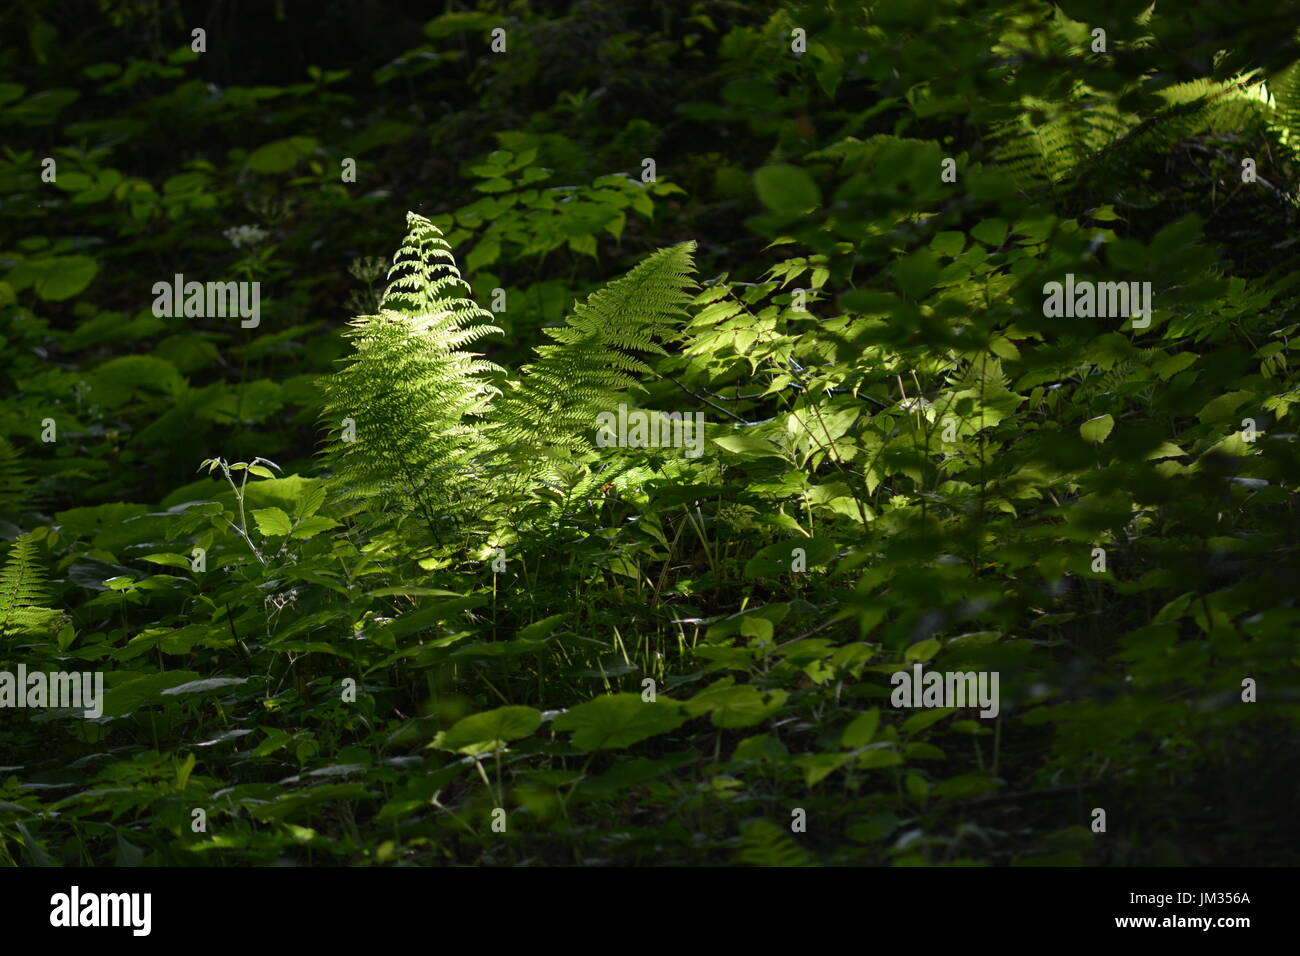 Berchtesgaden, Germany - June 8, 2017 - Beautiful fern with lights and shadows Stock Photo